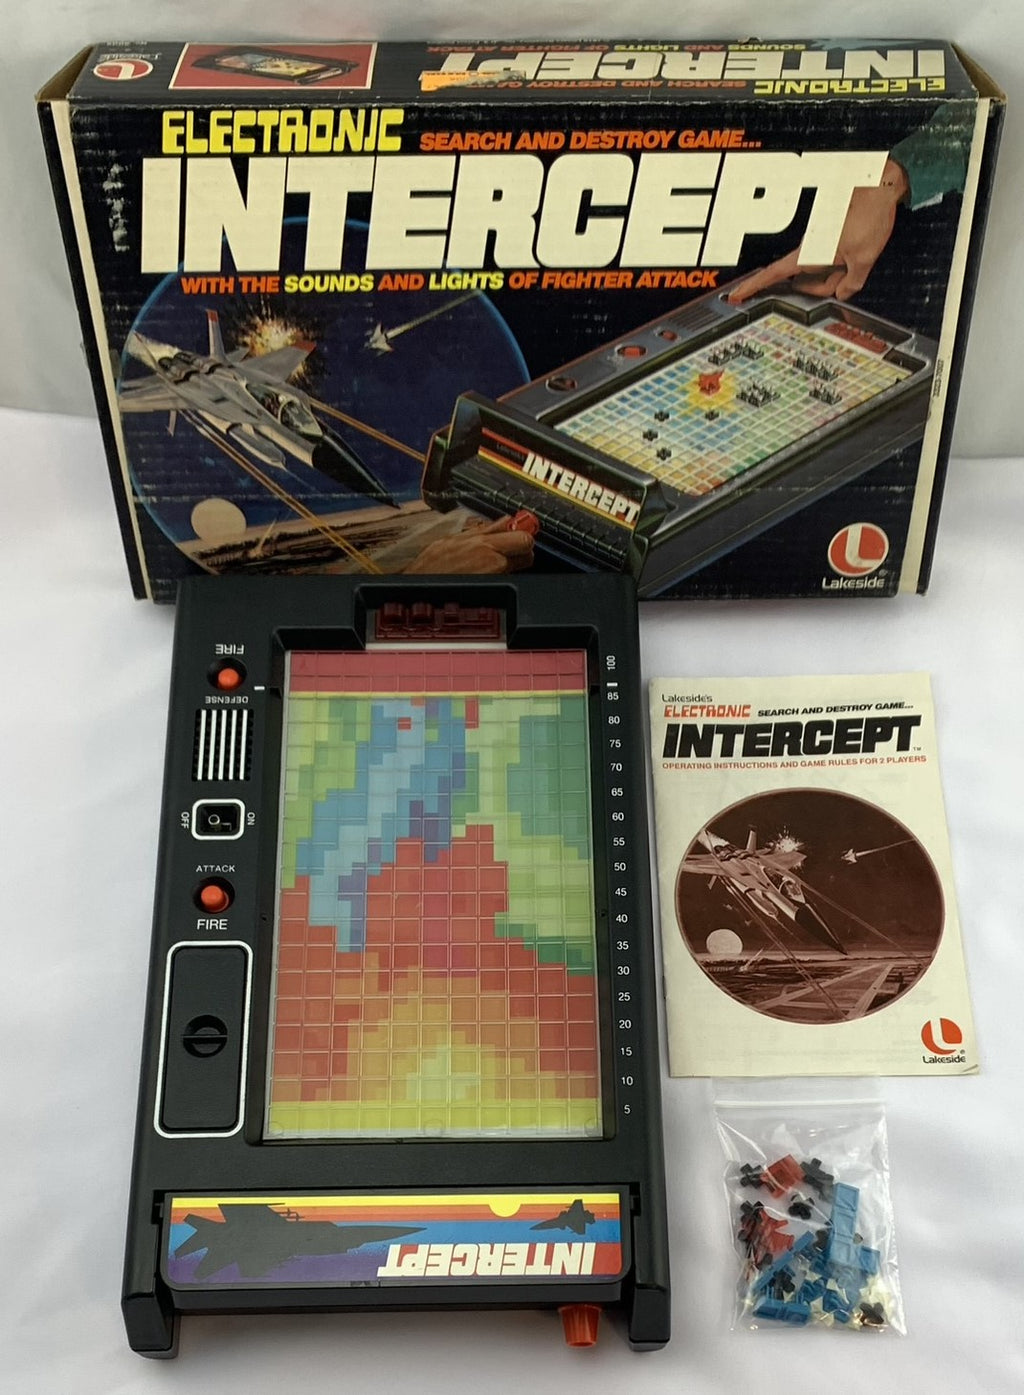 Intercept: The Electronic Search and Destroy Game - 1978 - Lakeside - Great Condition